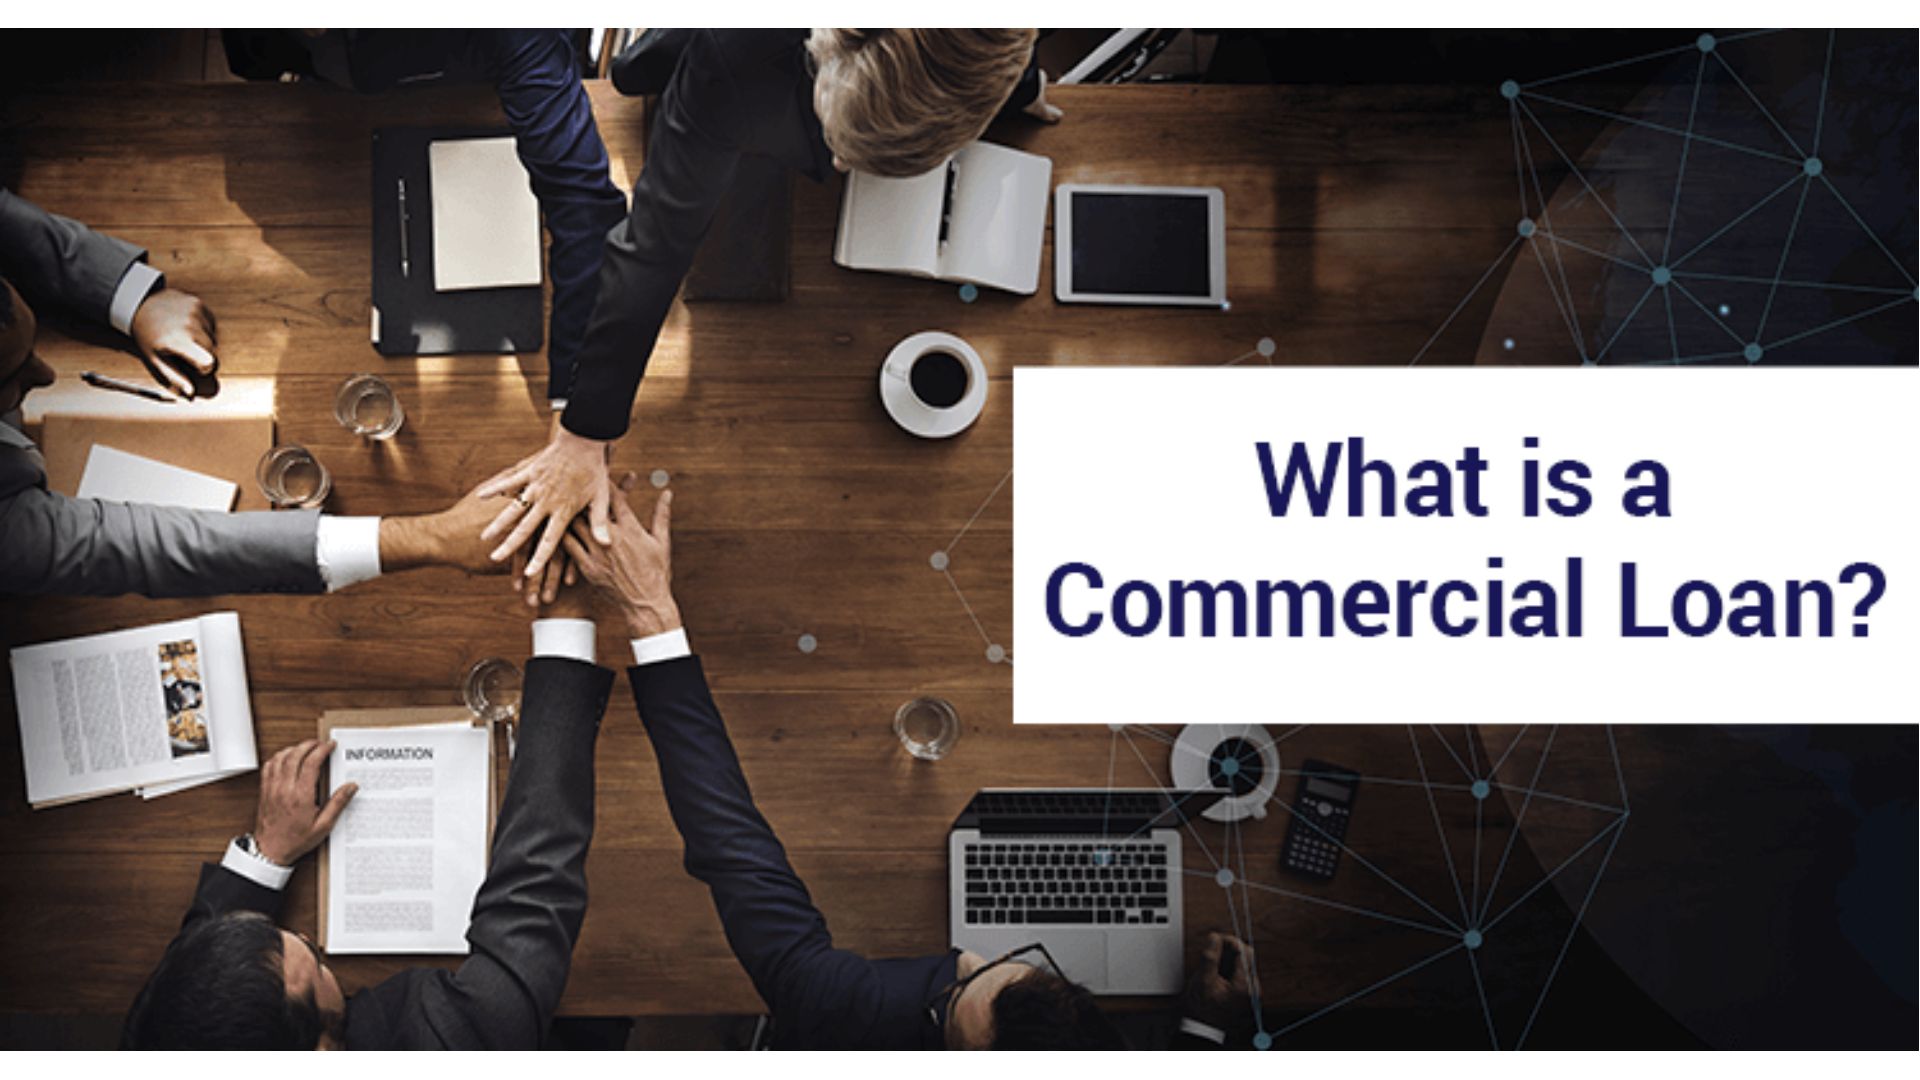 What Is a Commercial Loan